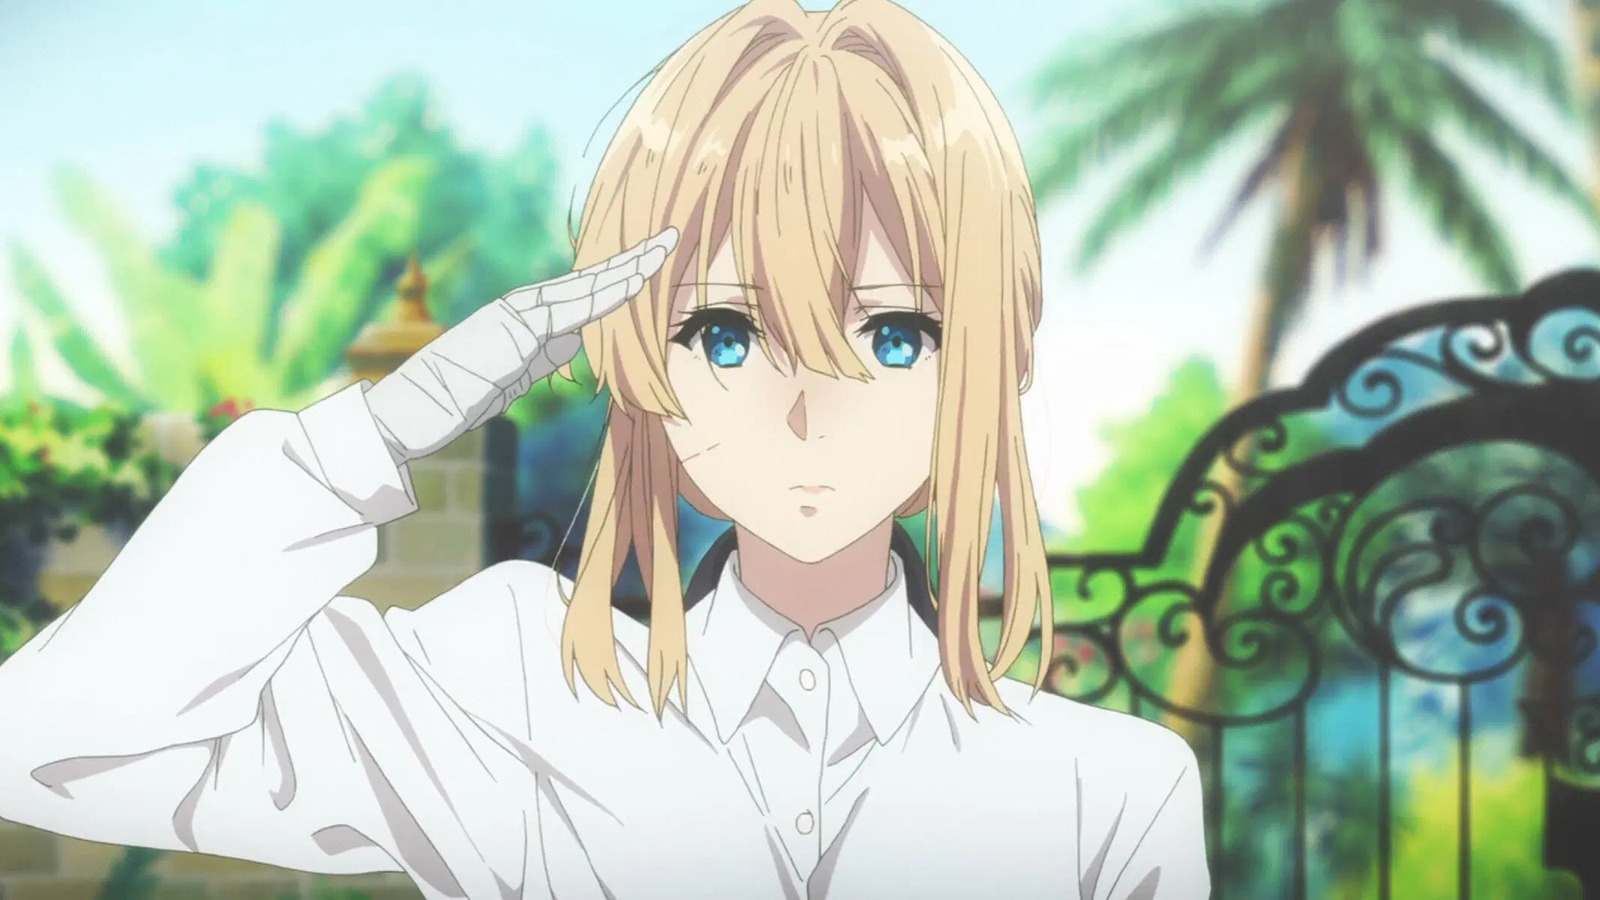 Violet Evergarden Is A Tear-Jerking Anime About Empathy And Humanity